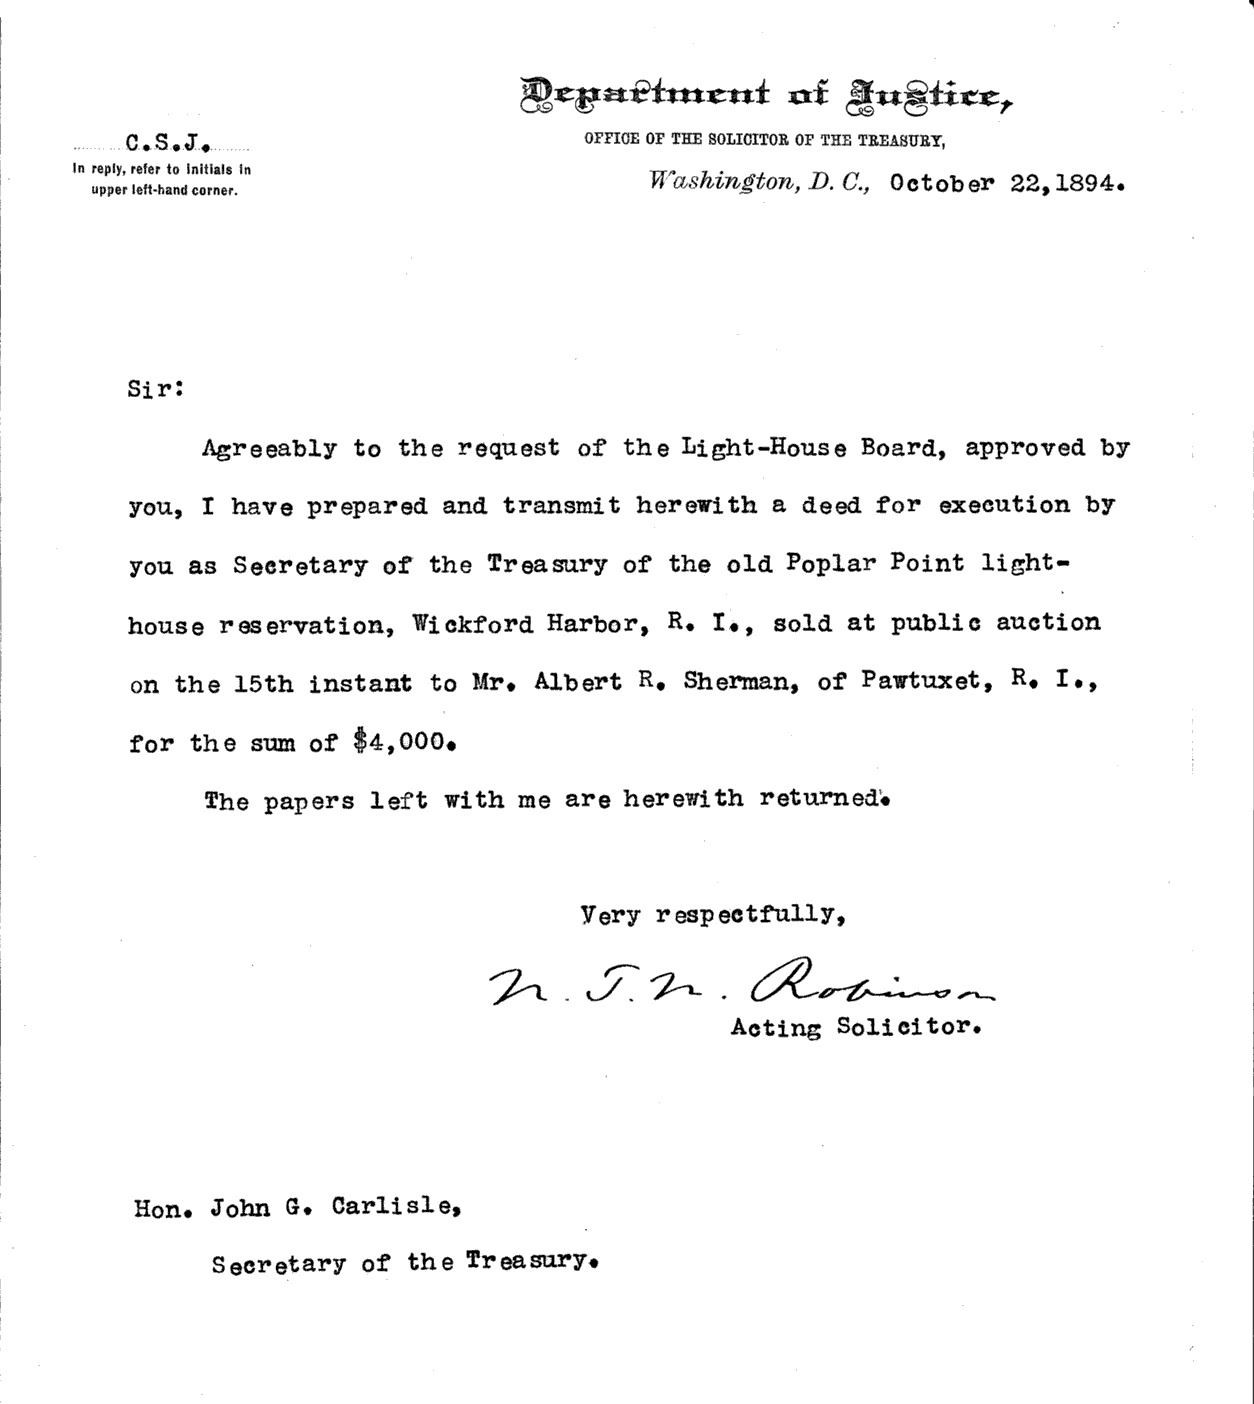 Poplar Point Light - Letter about transferring Poplar to the Federal Government  